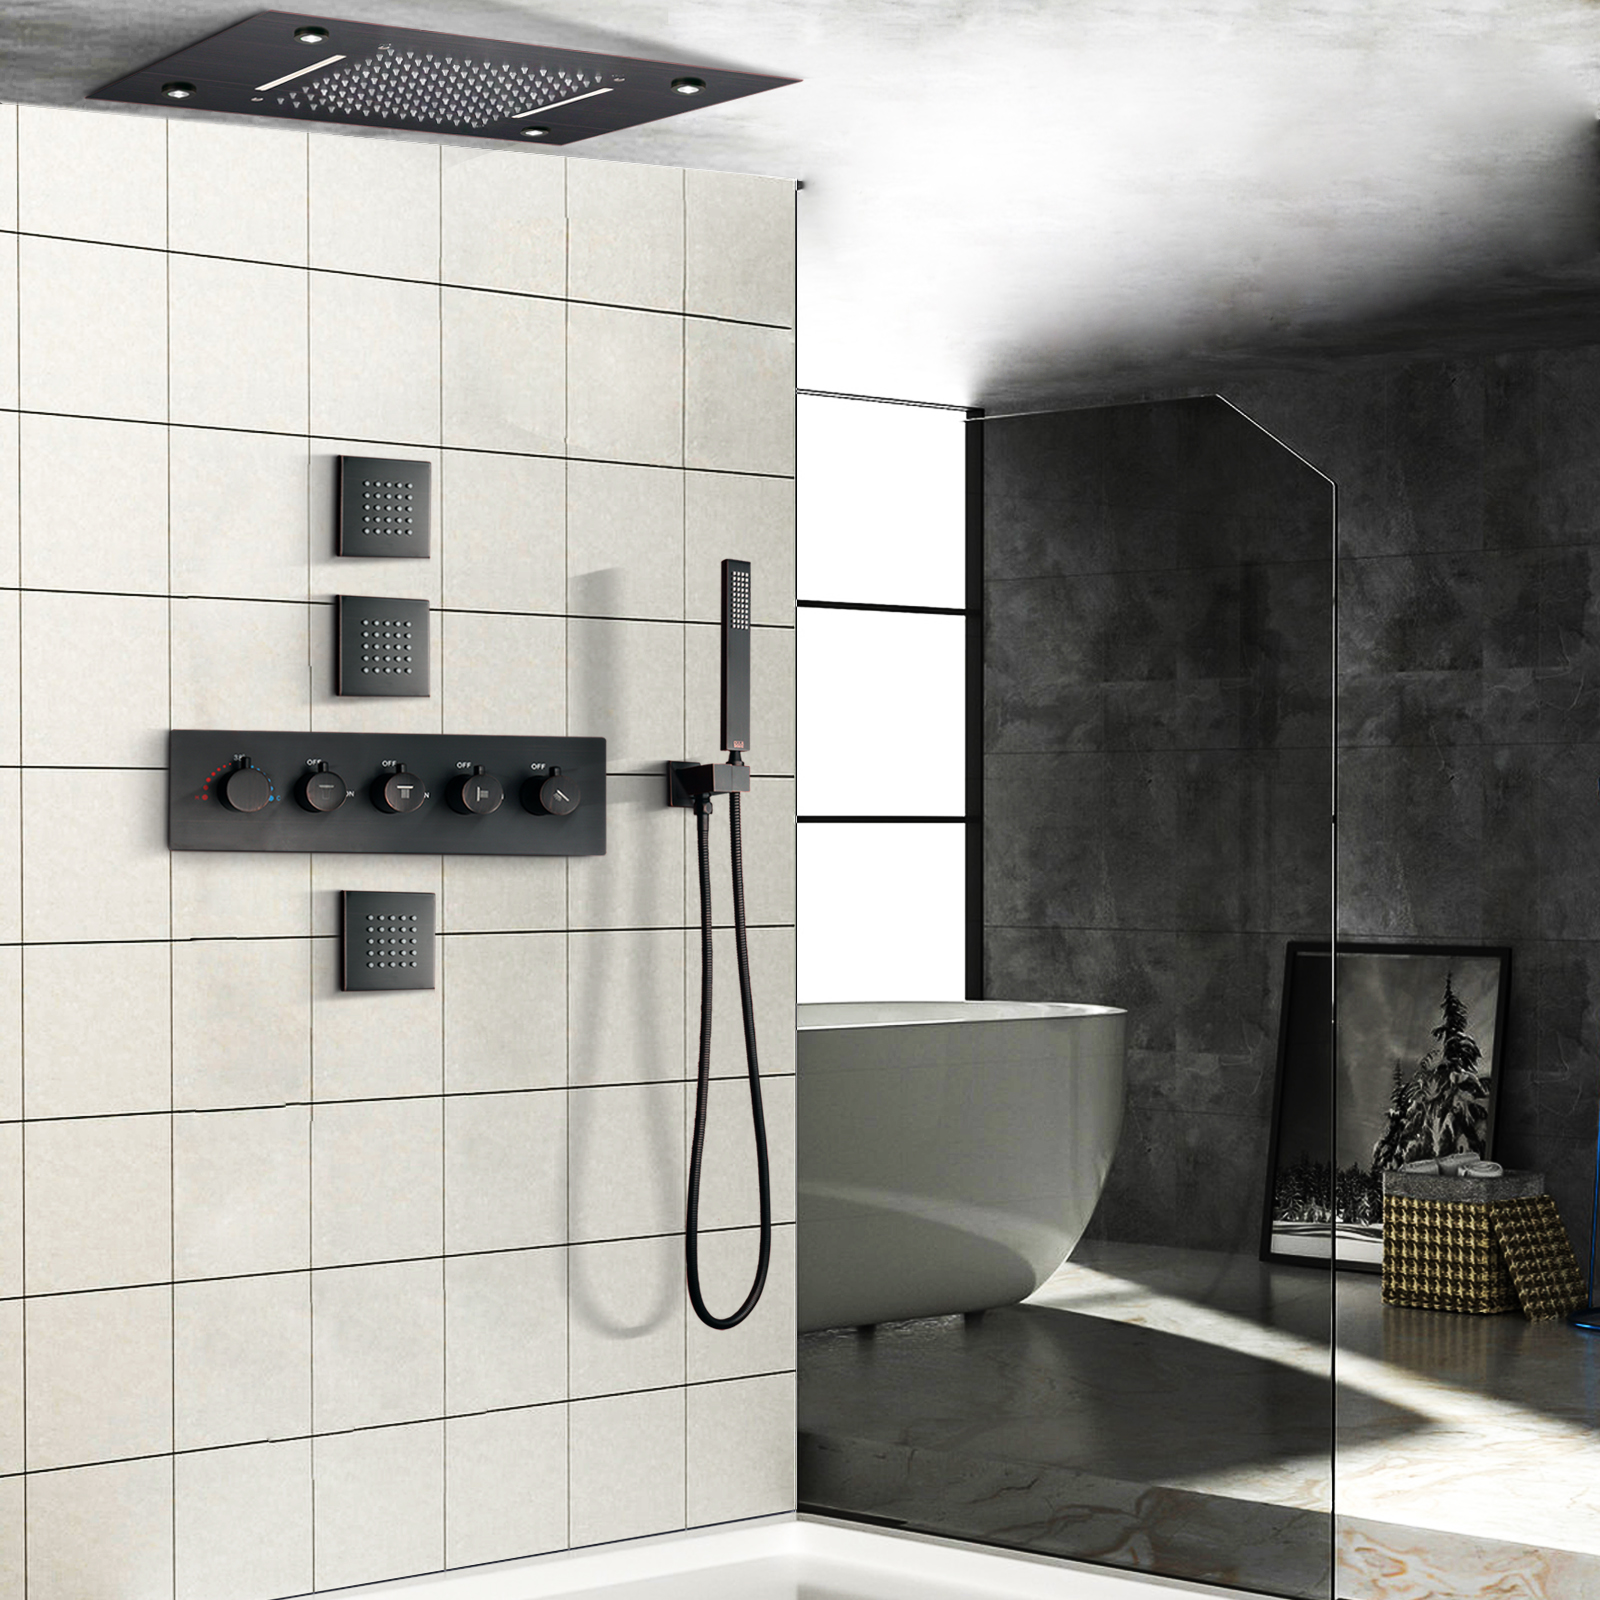 Oil Rubbed Bronze Thermostatic Shower System 50X36 CM LEDBathroom Concealed Shower Set With Spa Waterfall Rainfall